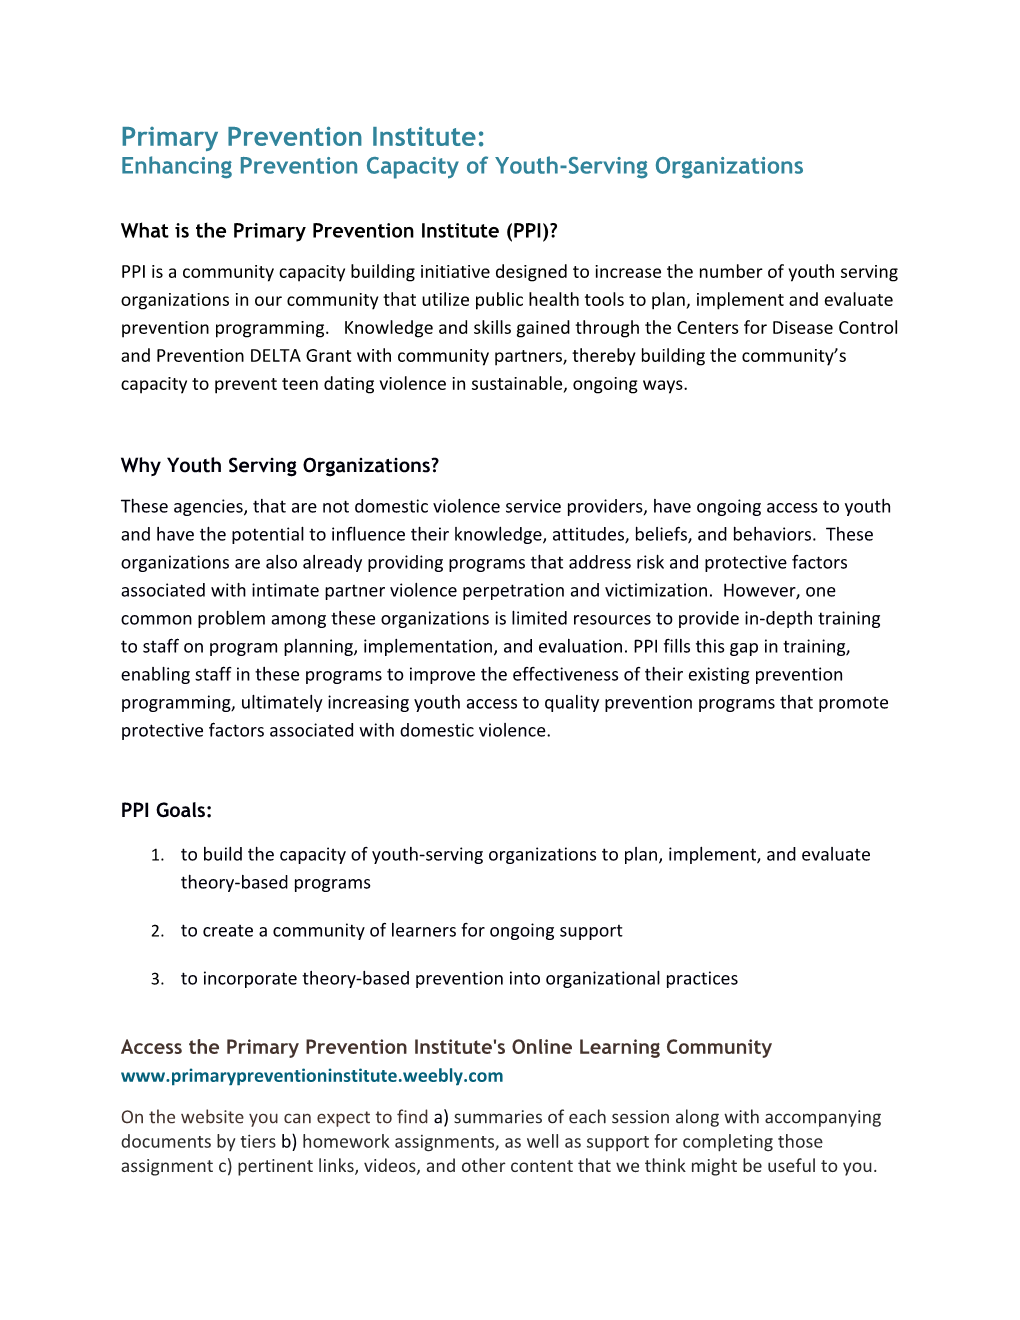 Enhancing Prevention Capacity of Youth-Serving Organizations